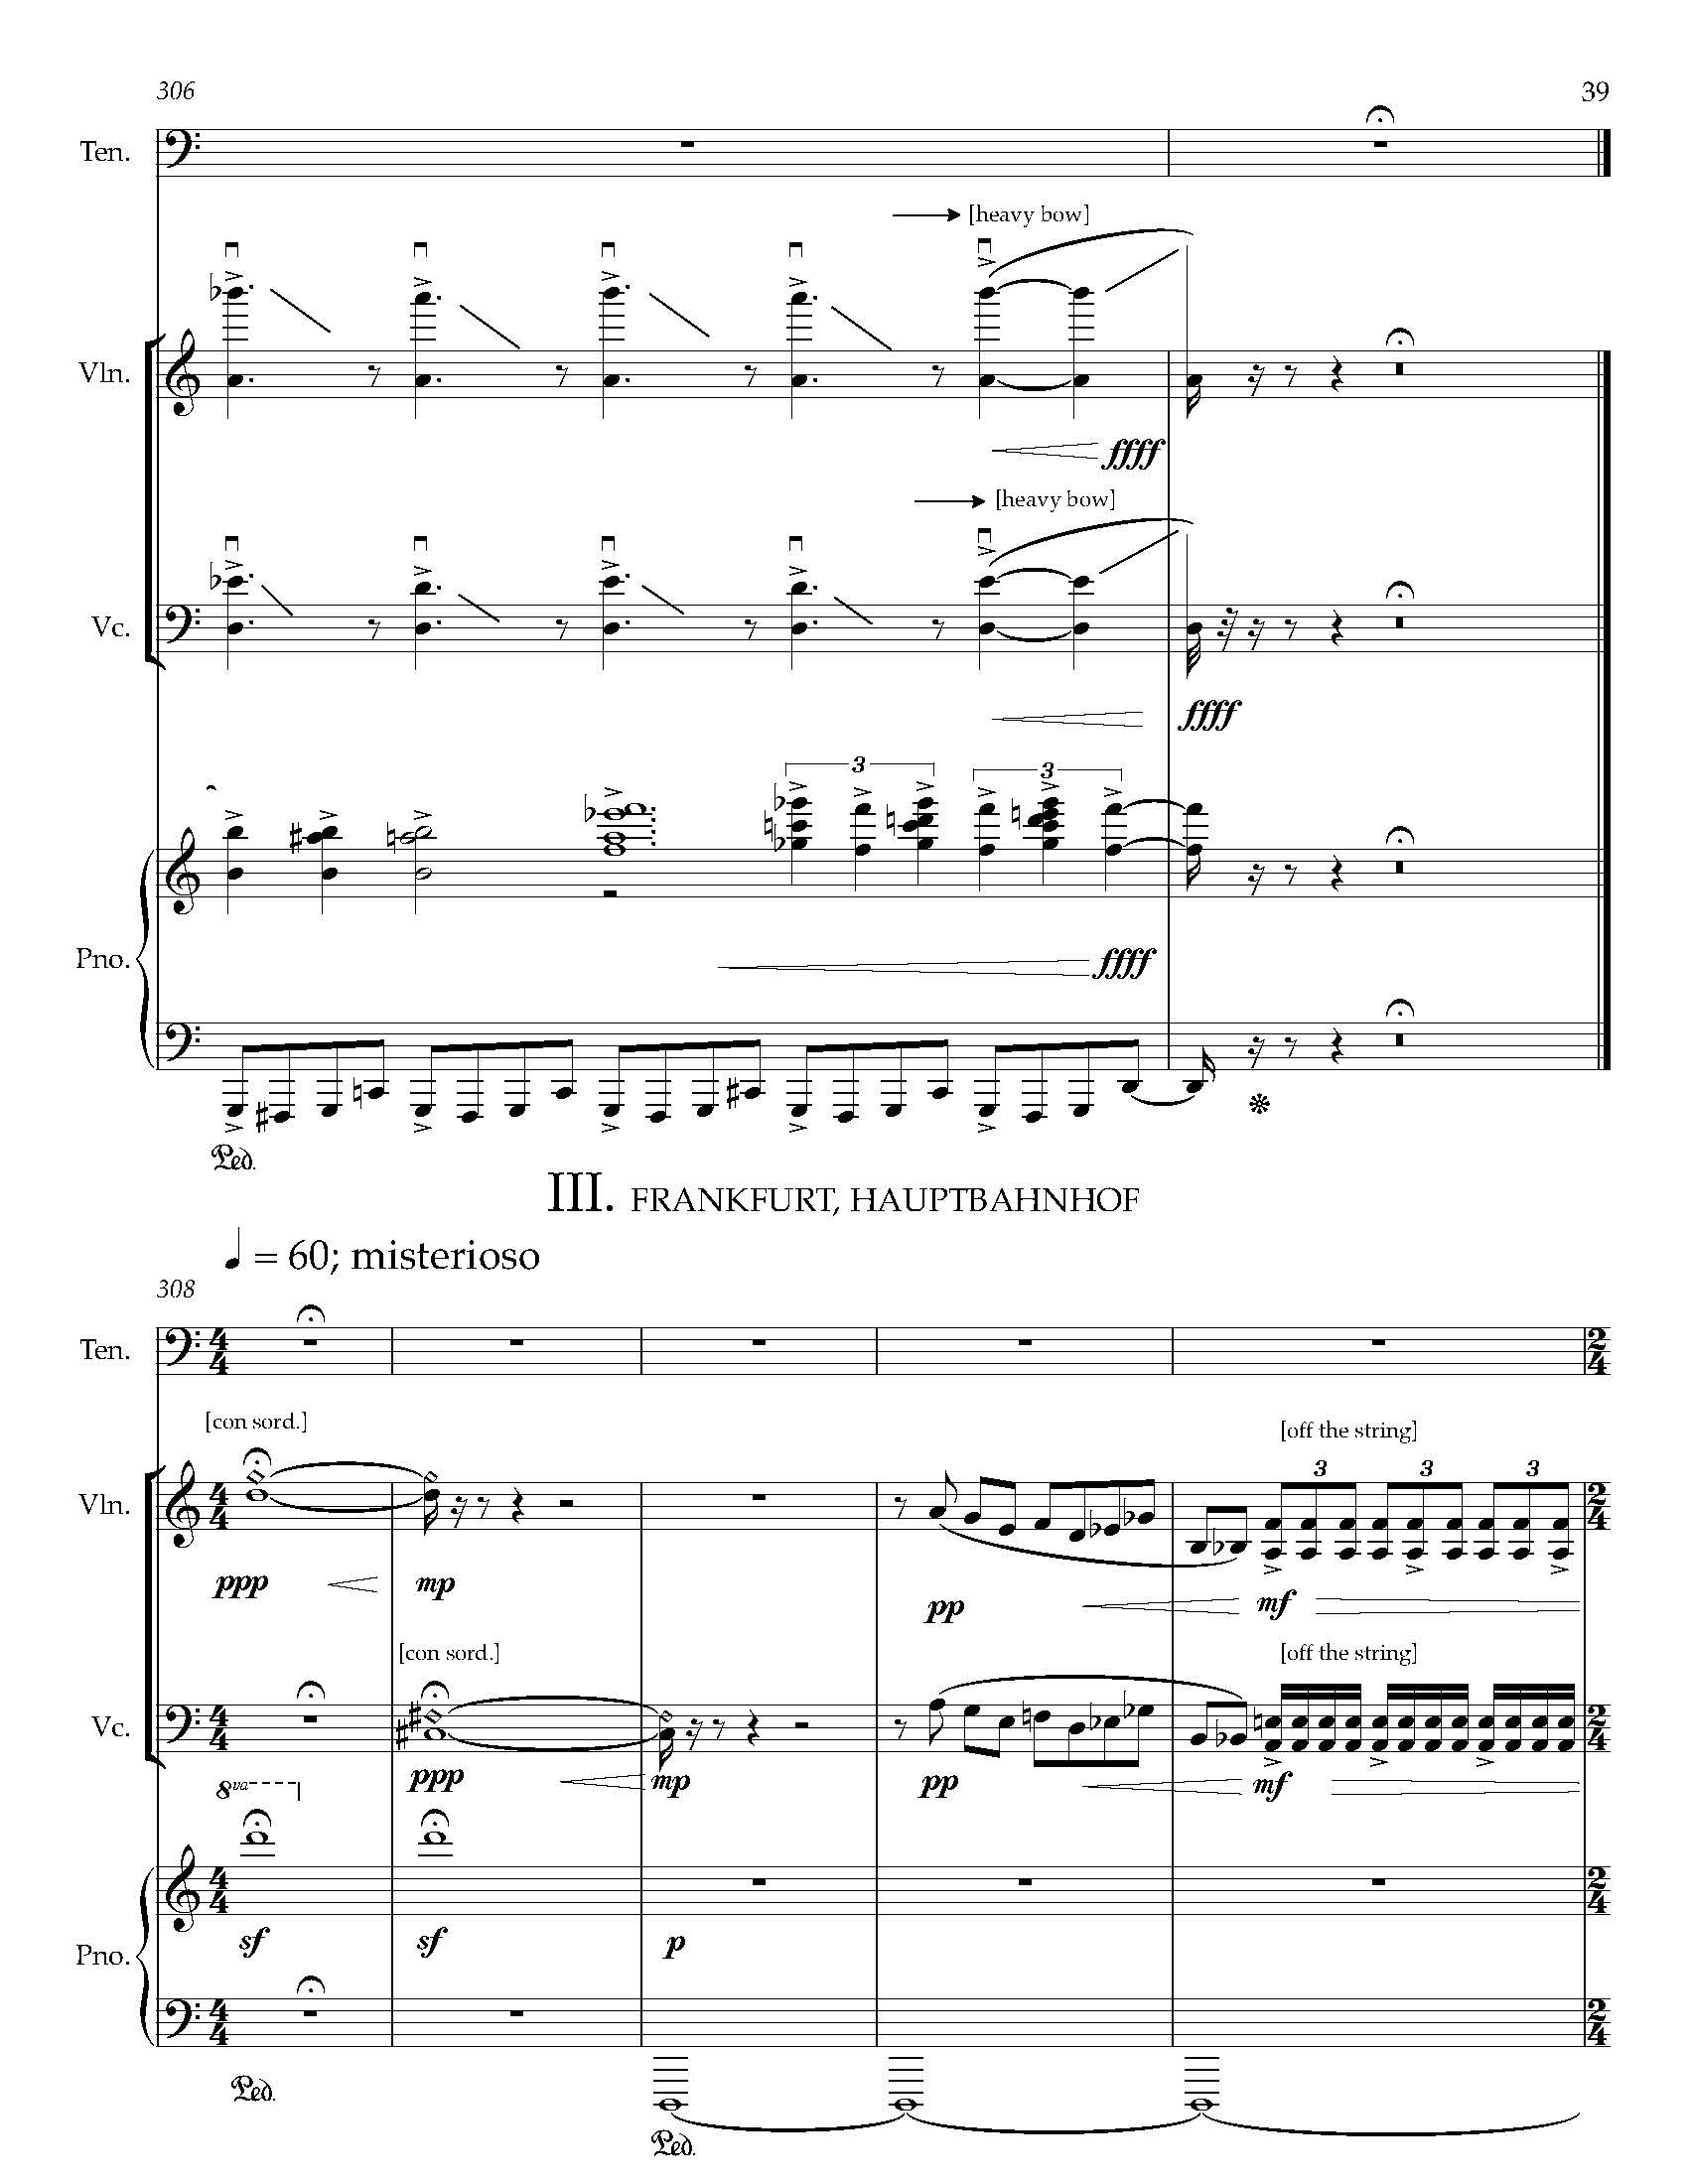 Gursky Songs - Complete Score_Page_47.jpg